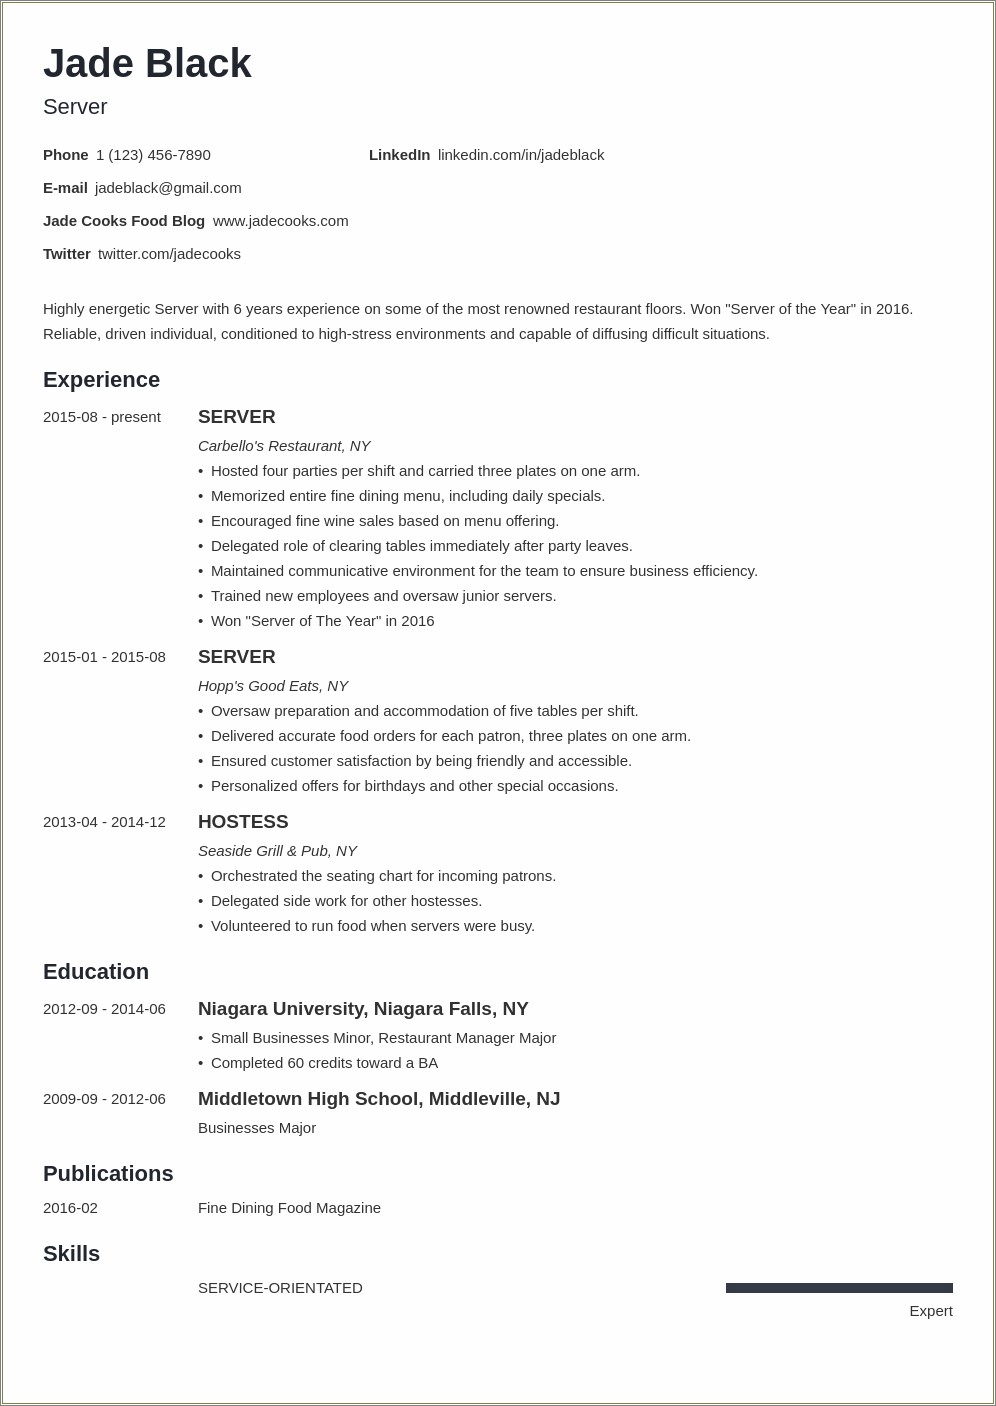 Do Resumes Need To Have Job Descriptions